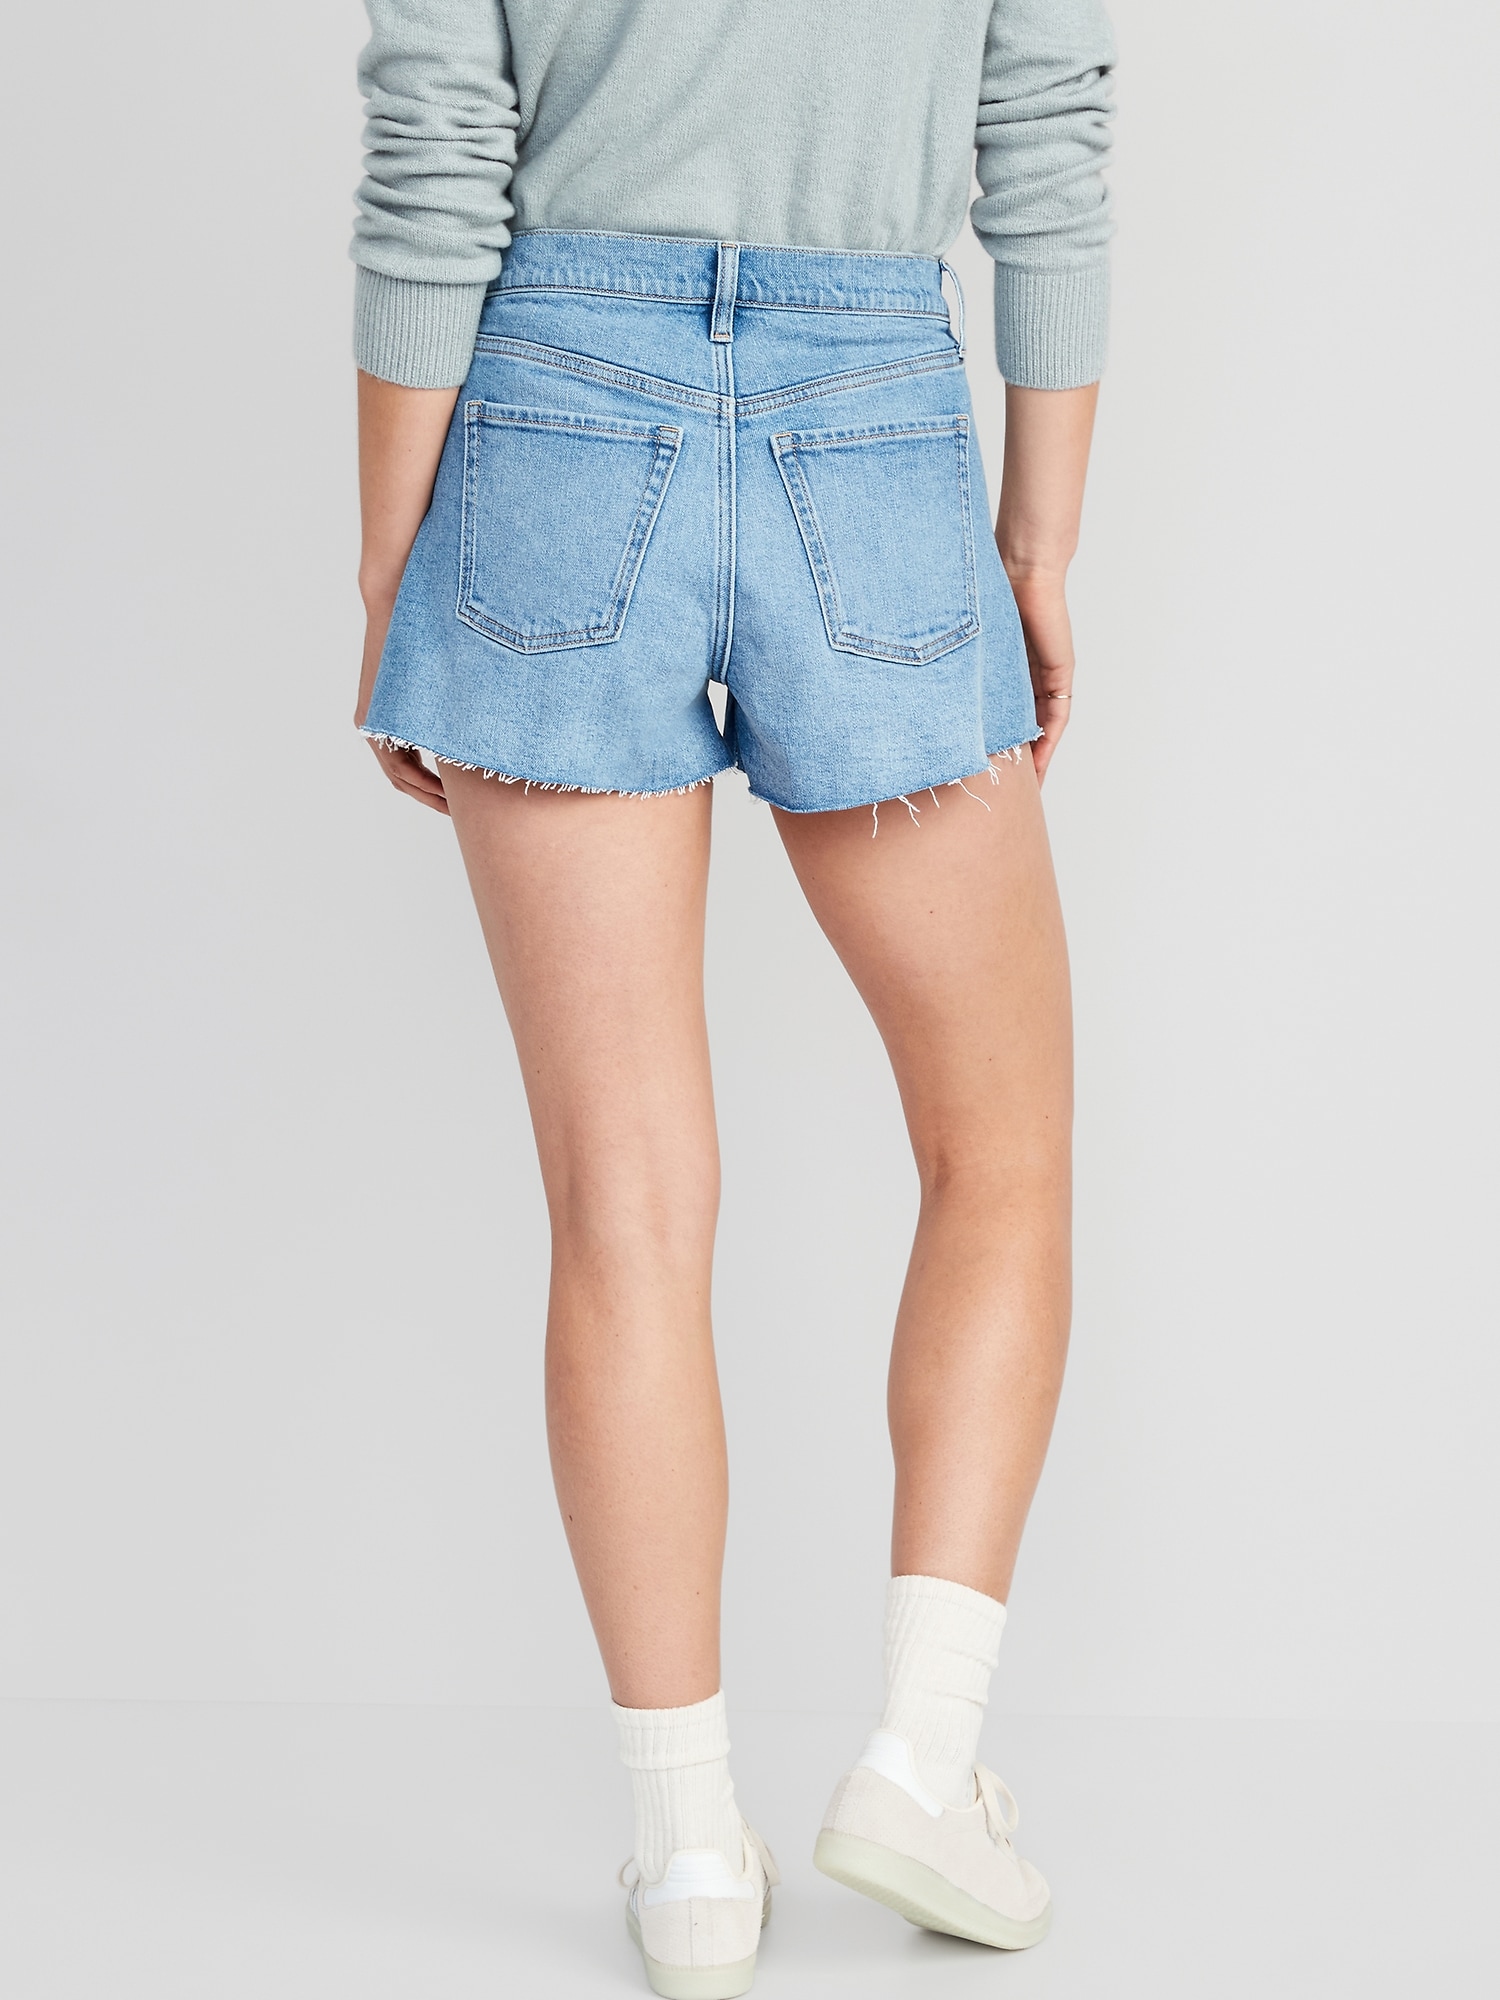 Higher High-Waisted Button-Fly A-Line Cutoff Jean Shorts for Women --  3-inch inseam